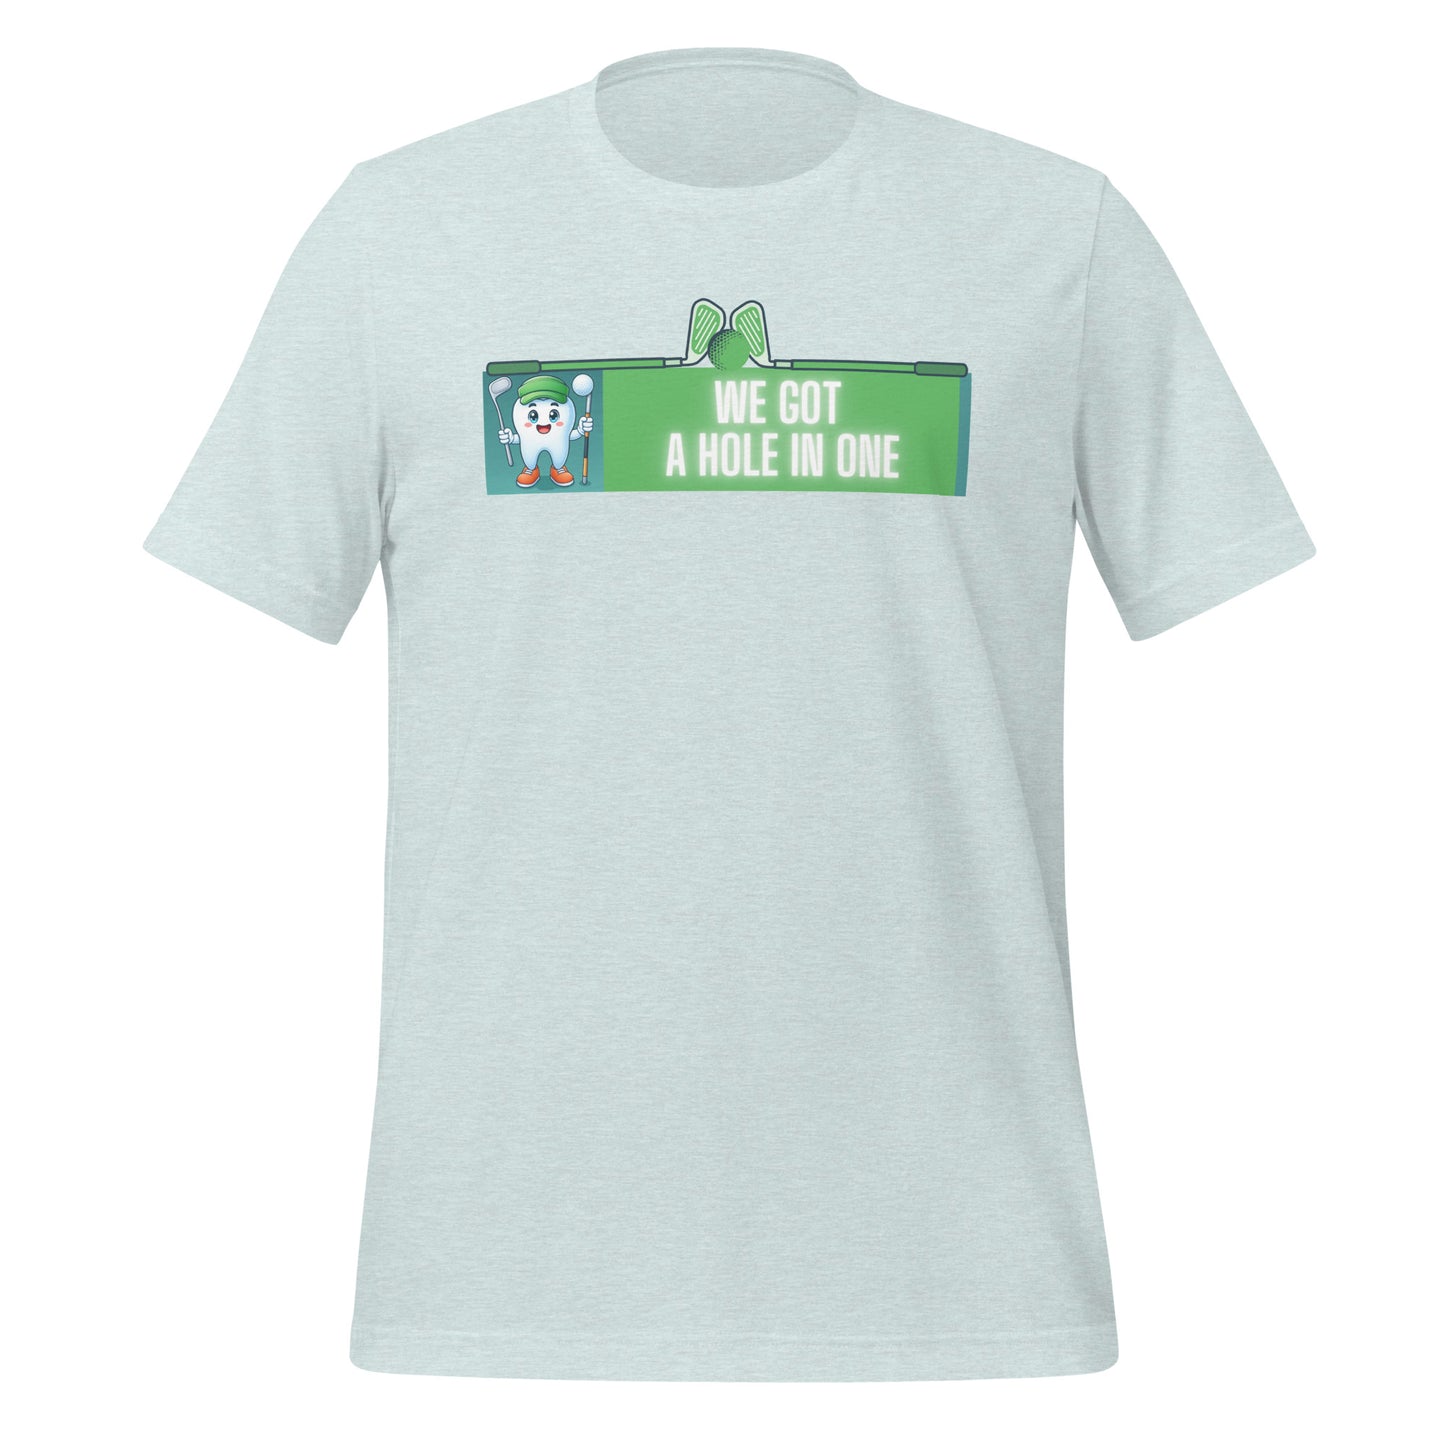 Cute dentist t-shirt showcasing an adorable tooth character in golf attire, joyfully celebrating a ‘hole in one’ achievement, perfect for dentist and dental professionals seeking unique and thematic dental apparel. Heather prism ice blue color, front view.